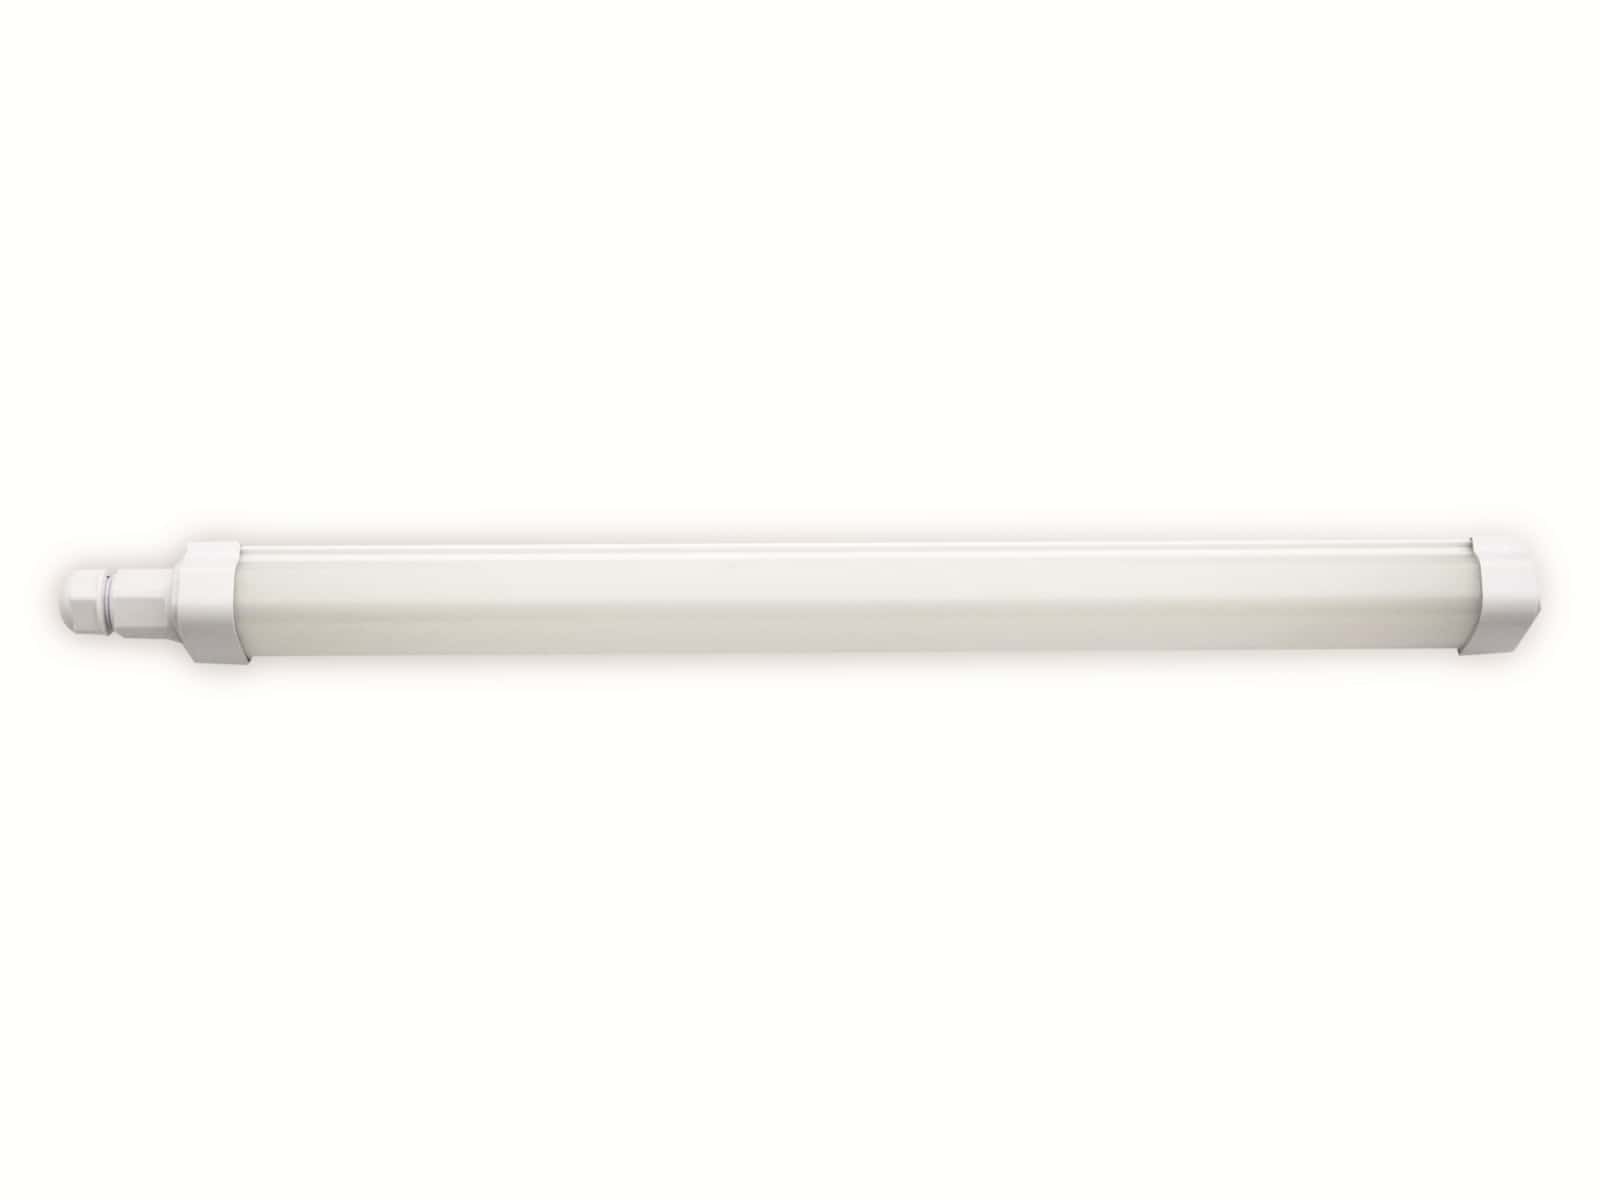 BLULAXA LED-Feuchtraum-Wannenleuchte, HumiLED, 20 W, 2500 lm, 4000 K, 1200 mm